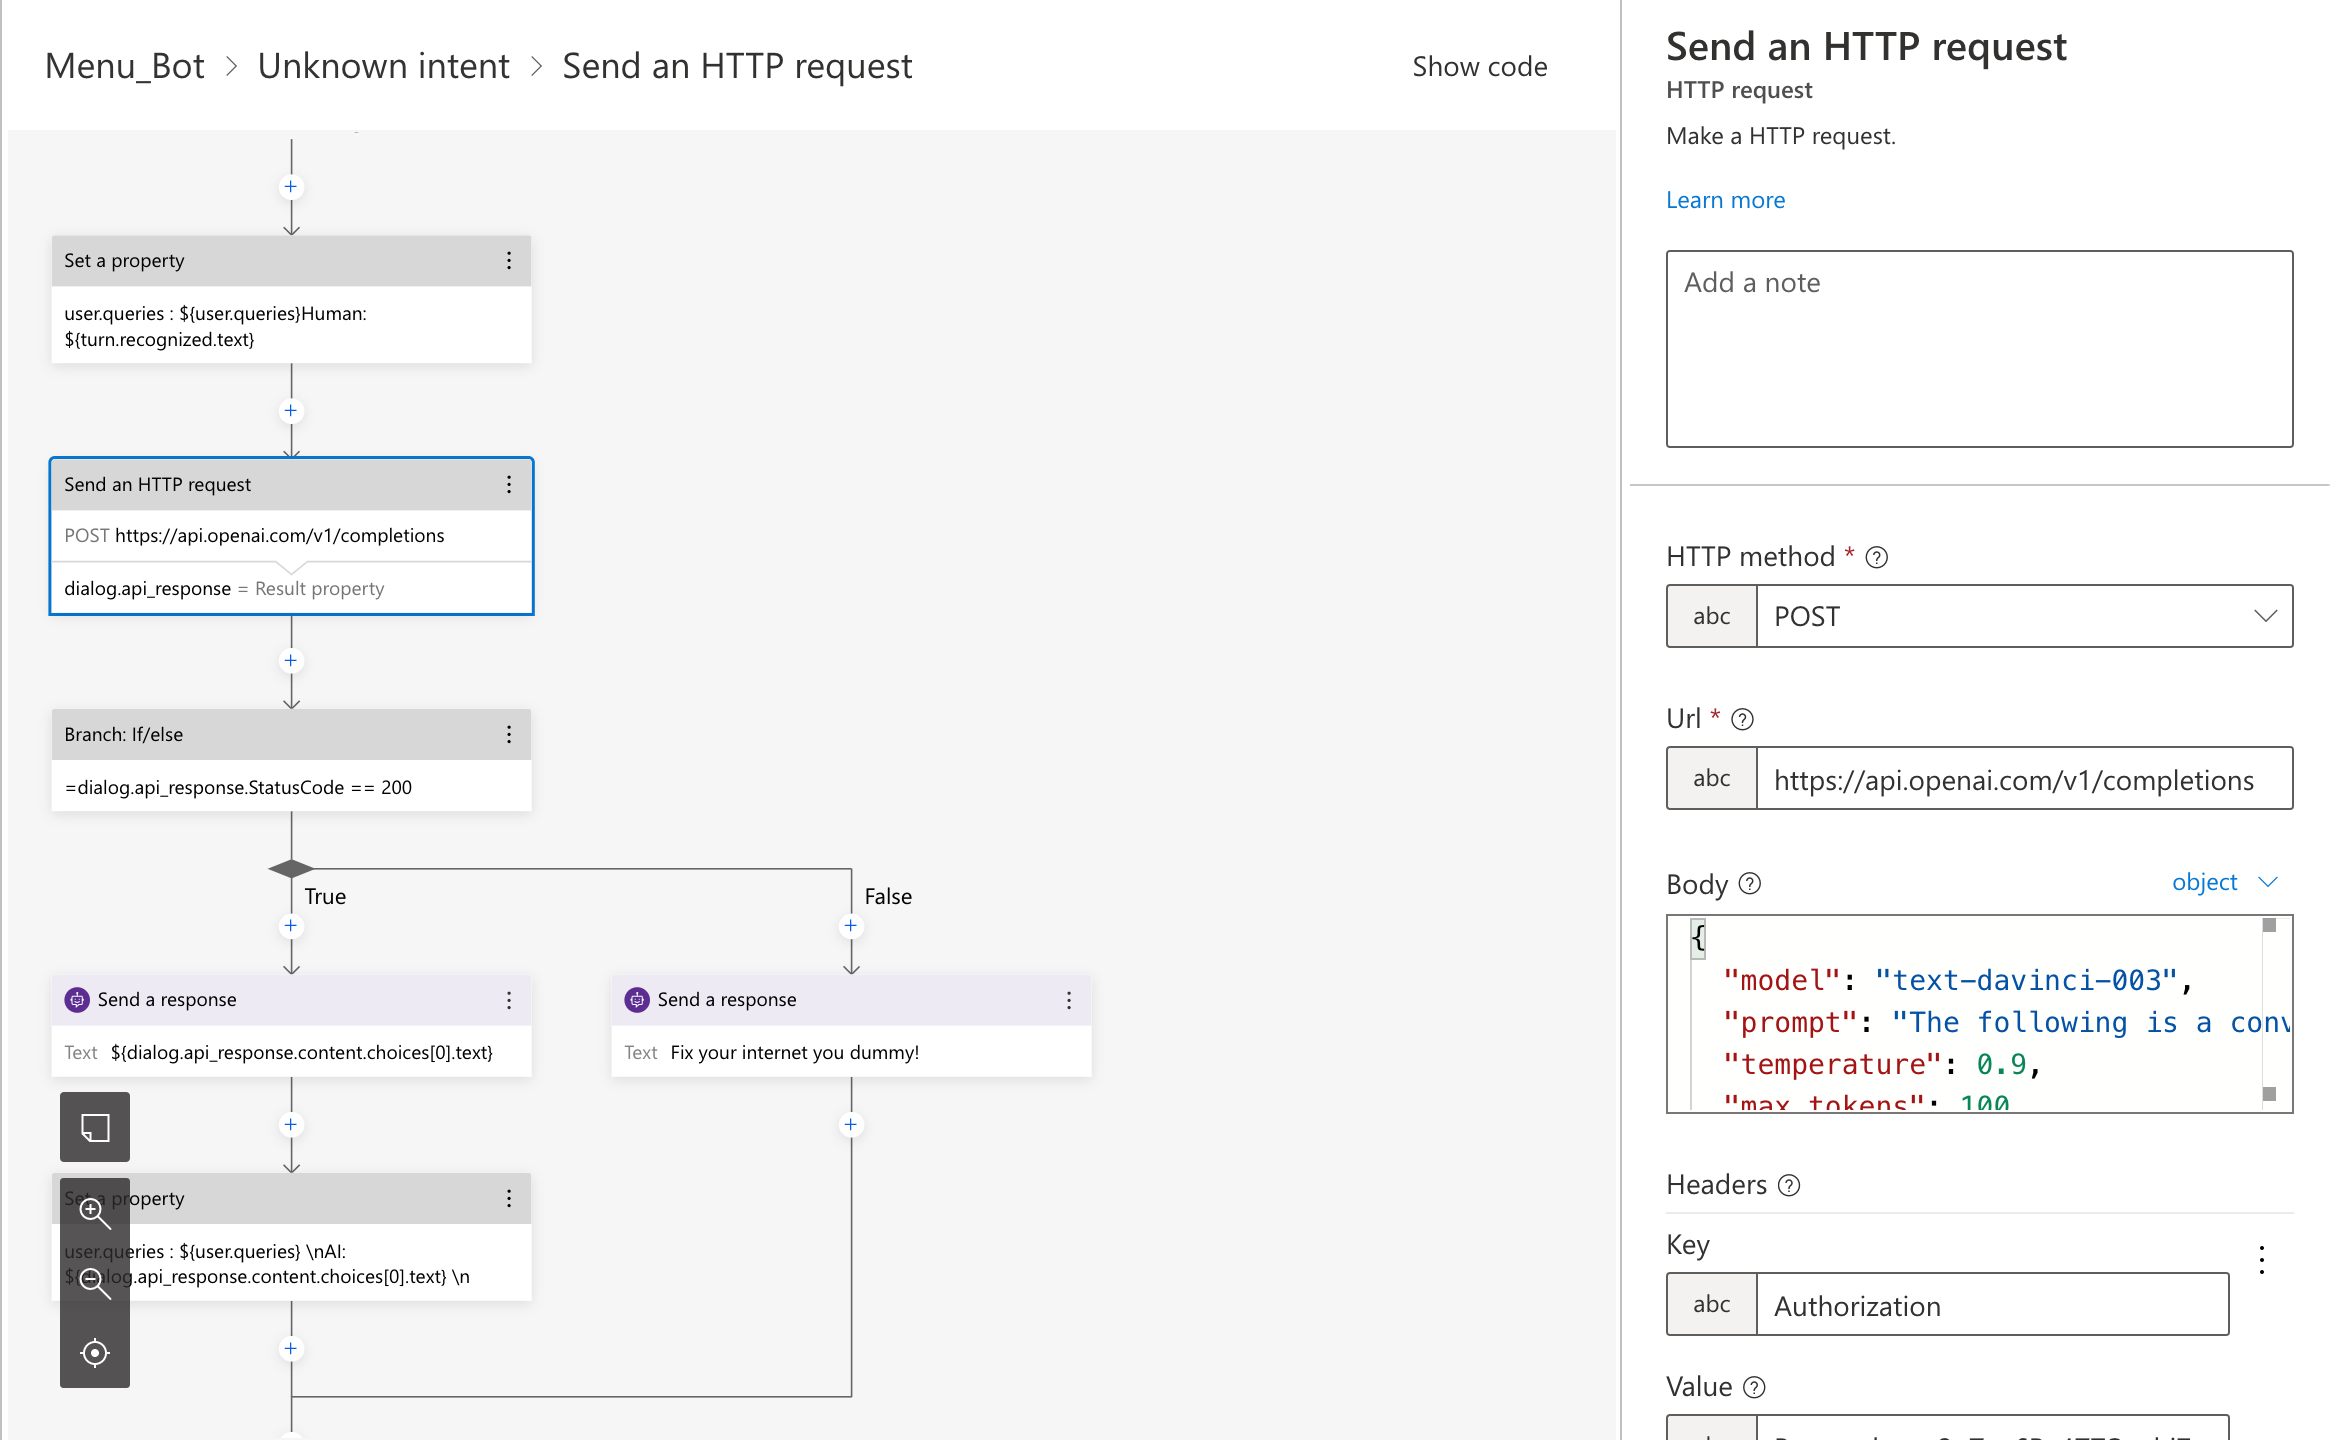 A screenshot of the
Azure Bot Service, showing the intent diagram flow, which includes sending an
HTTP request, and responses after the HTTP request succeeds or fails.